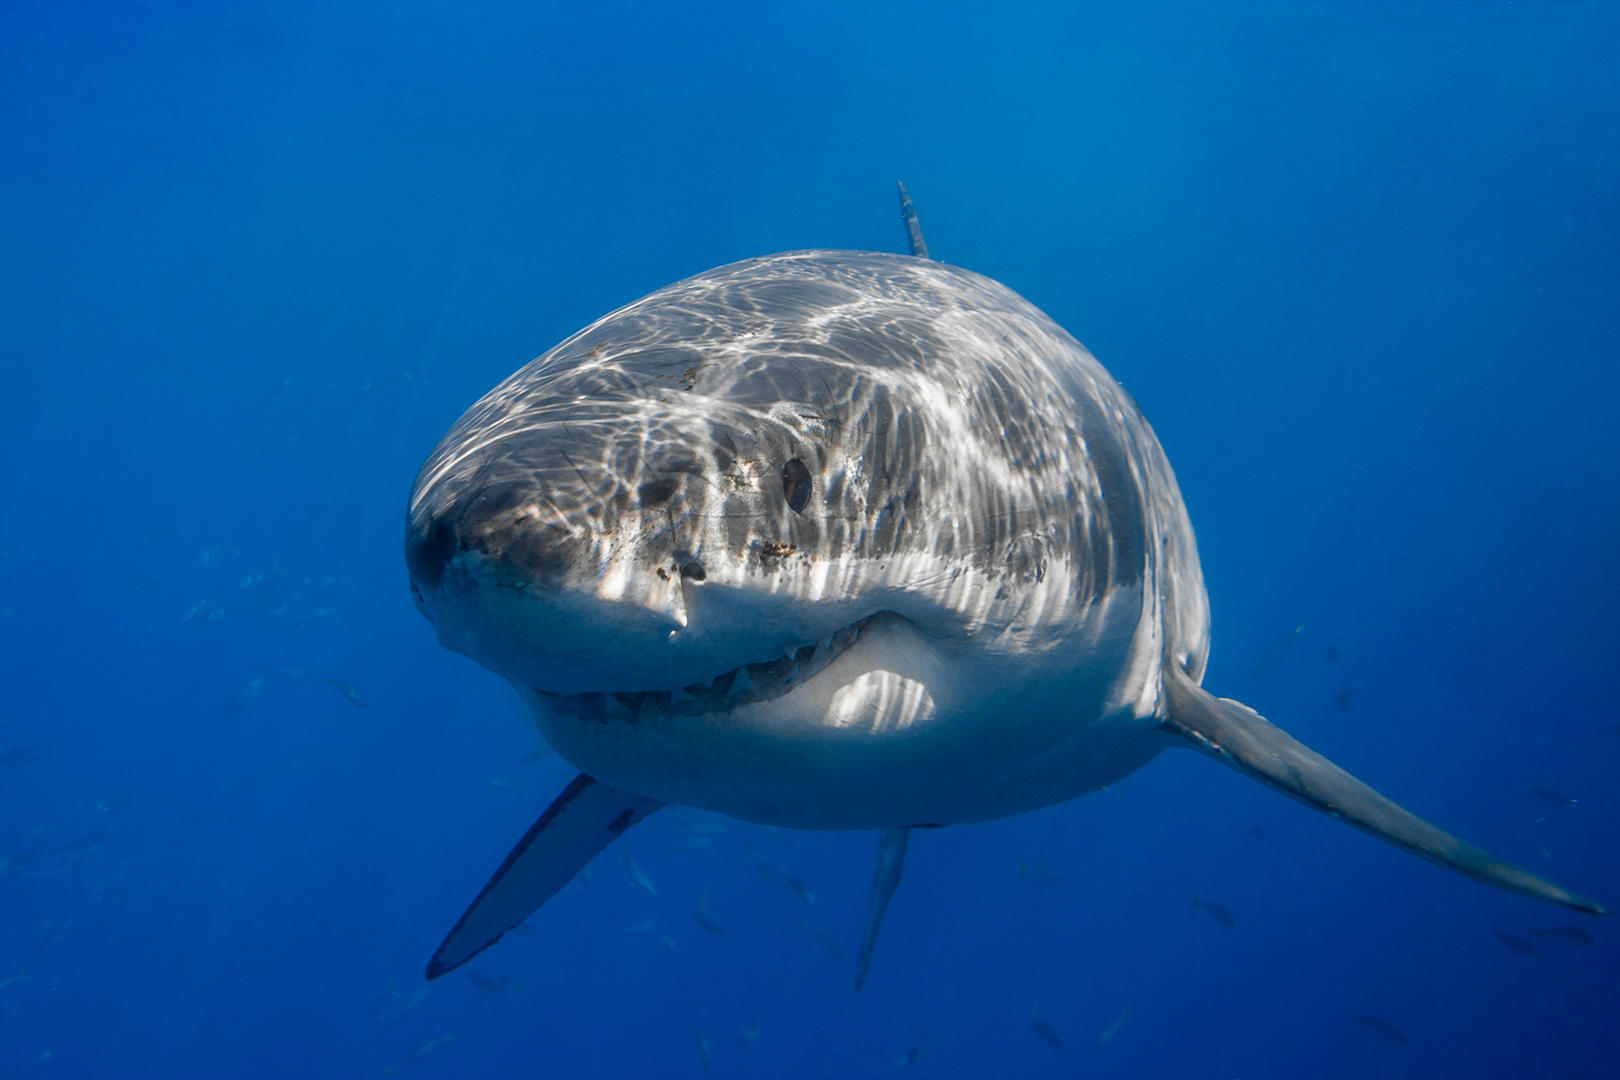 Cal Ripfin, a male great white shark, smiles for a close-up portrait image